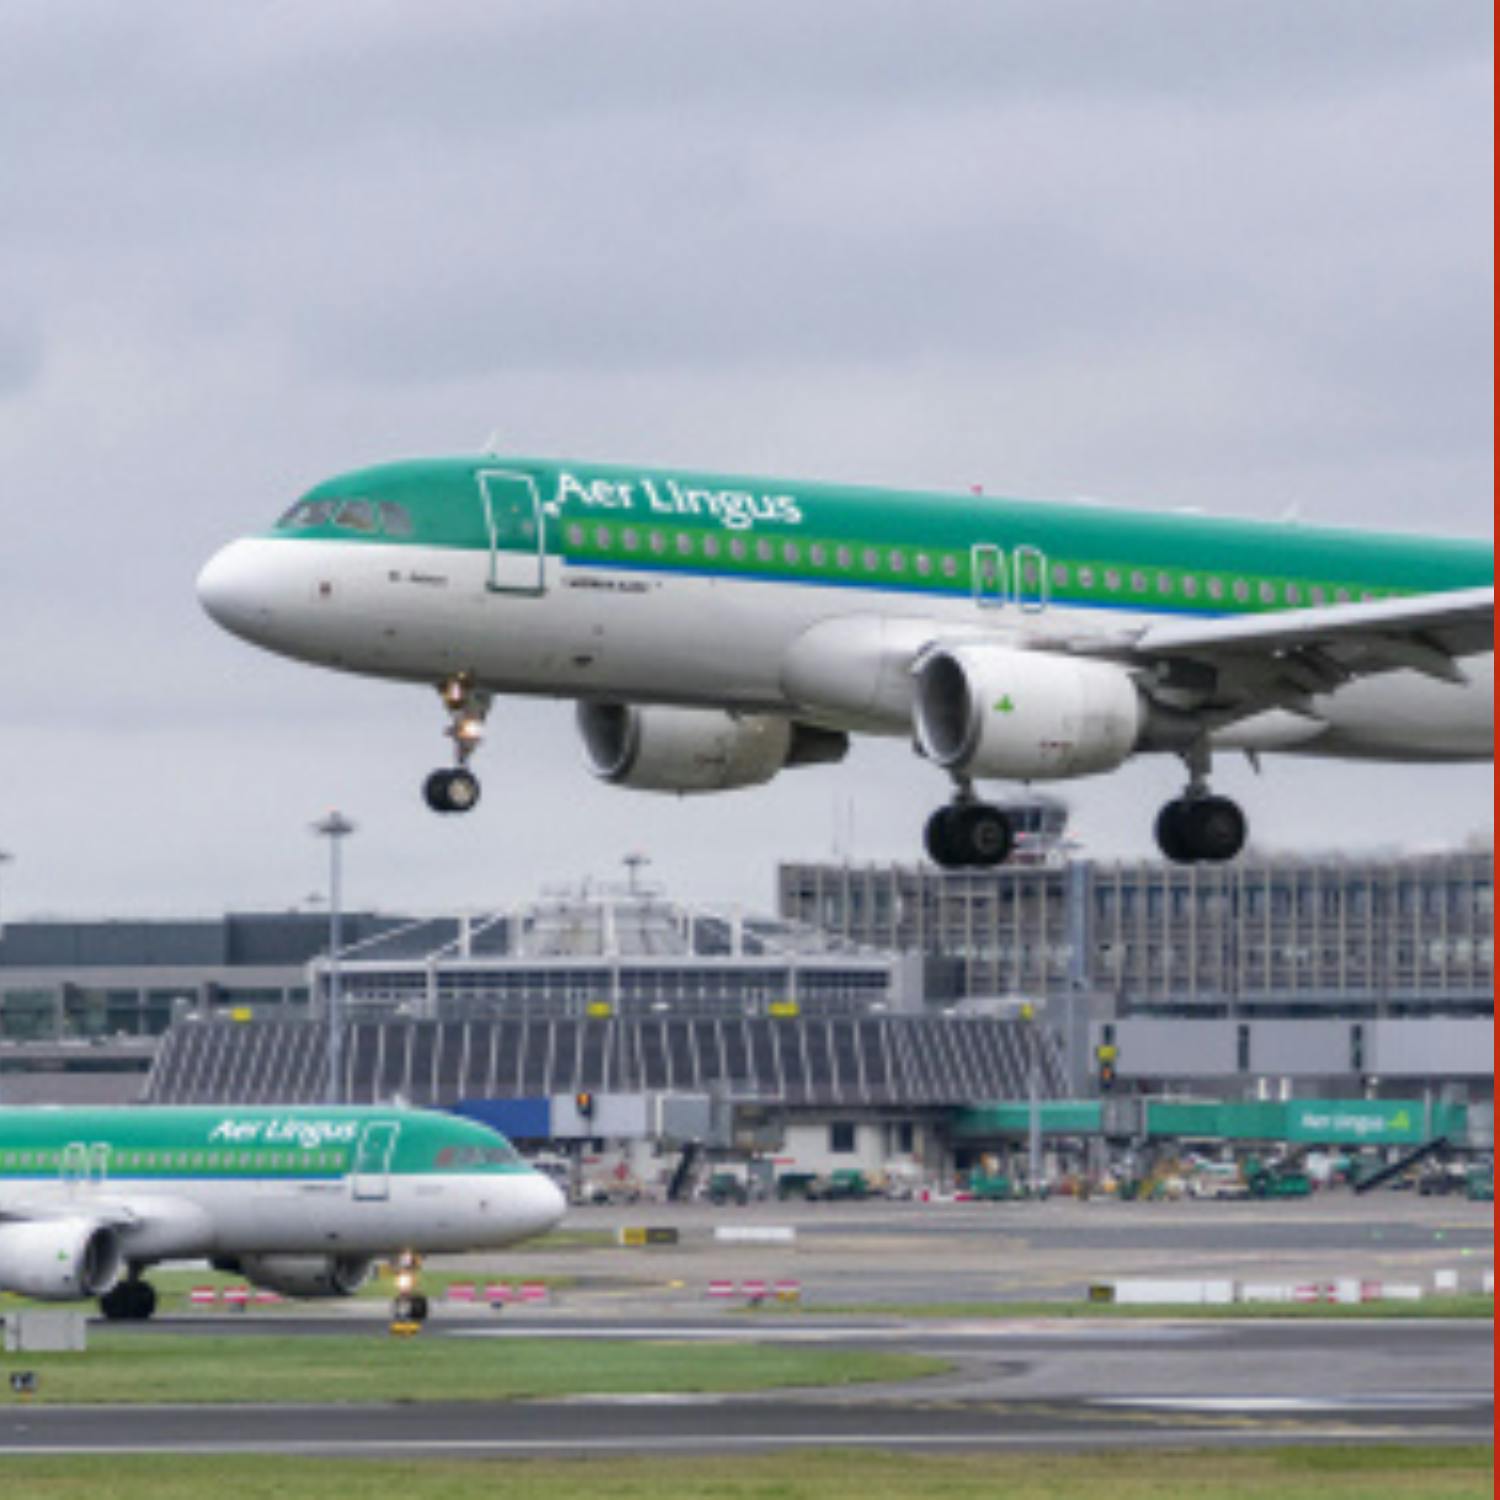 The latest on the Aer Lingus pilot strike